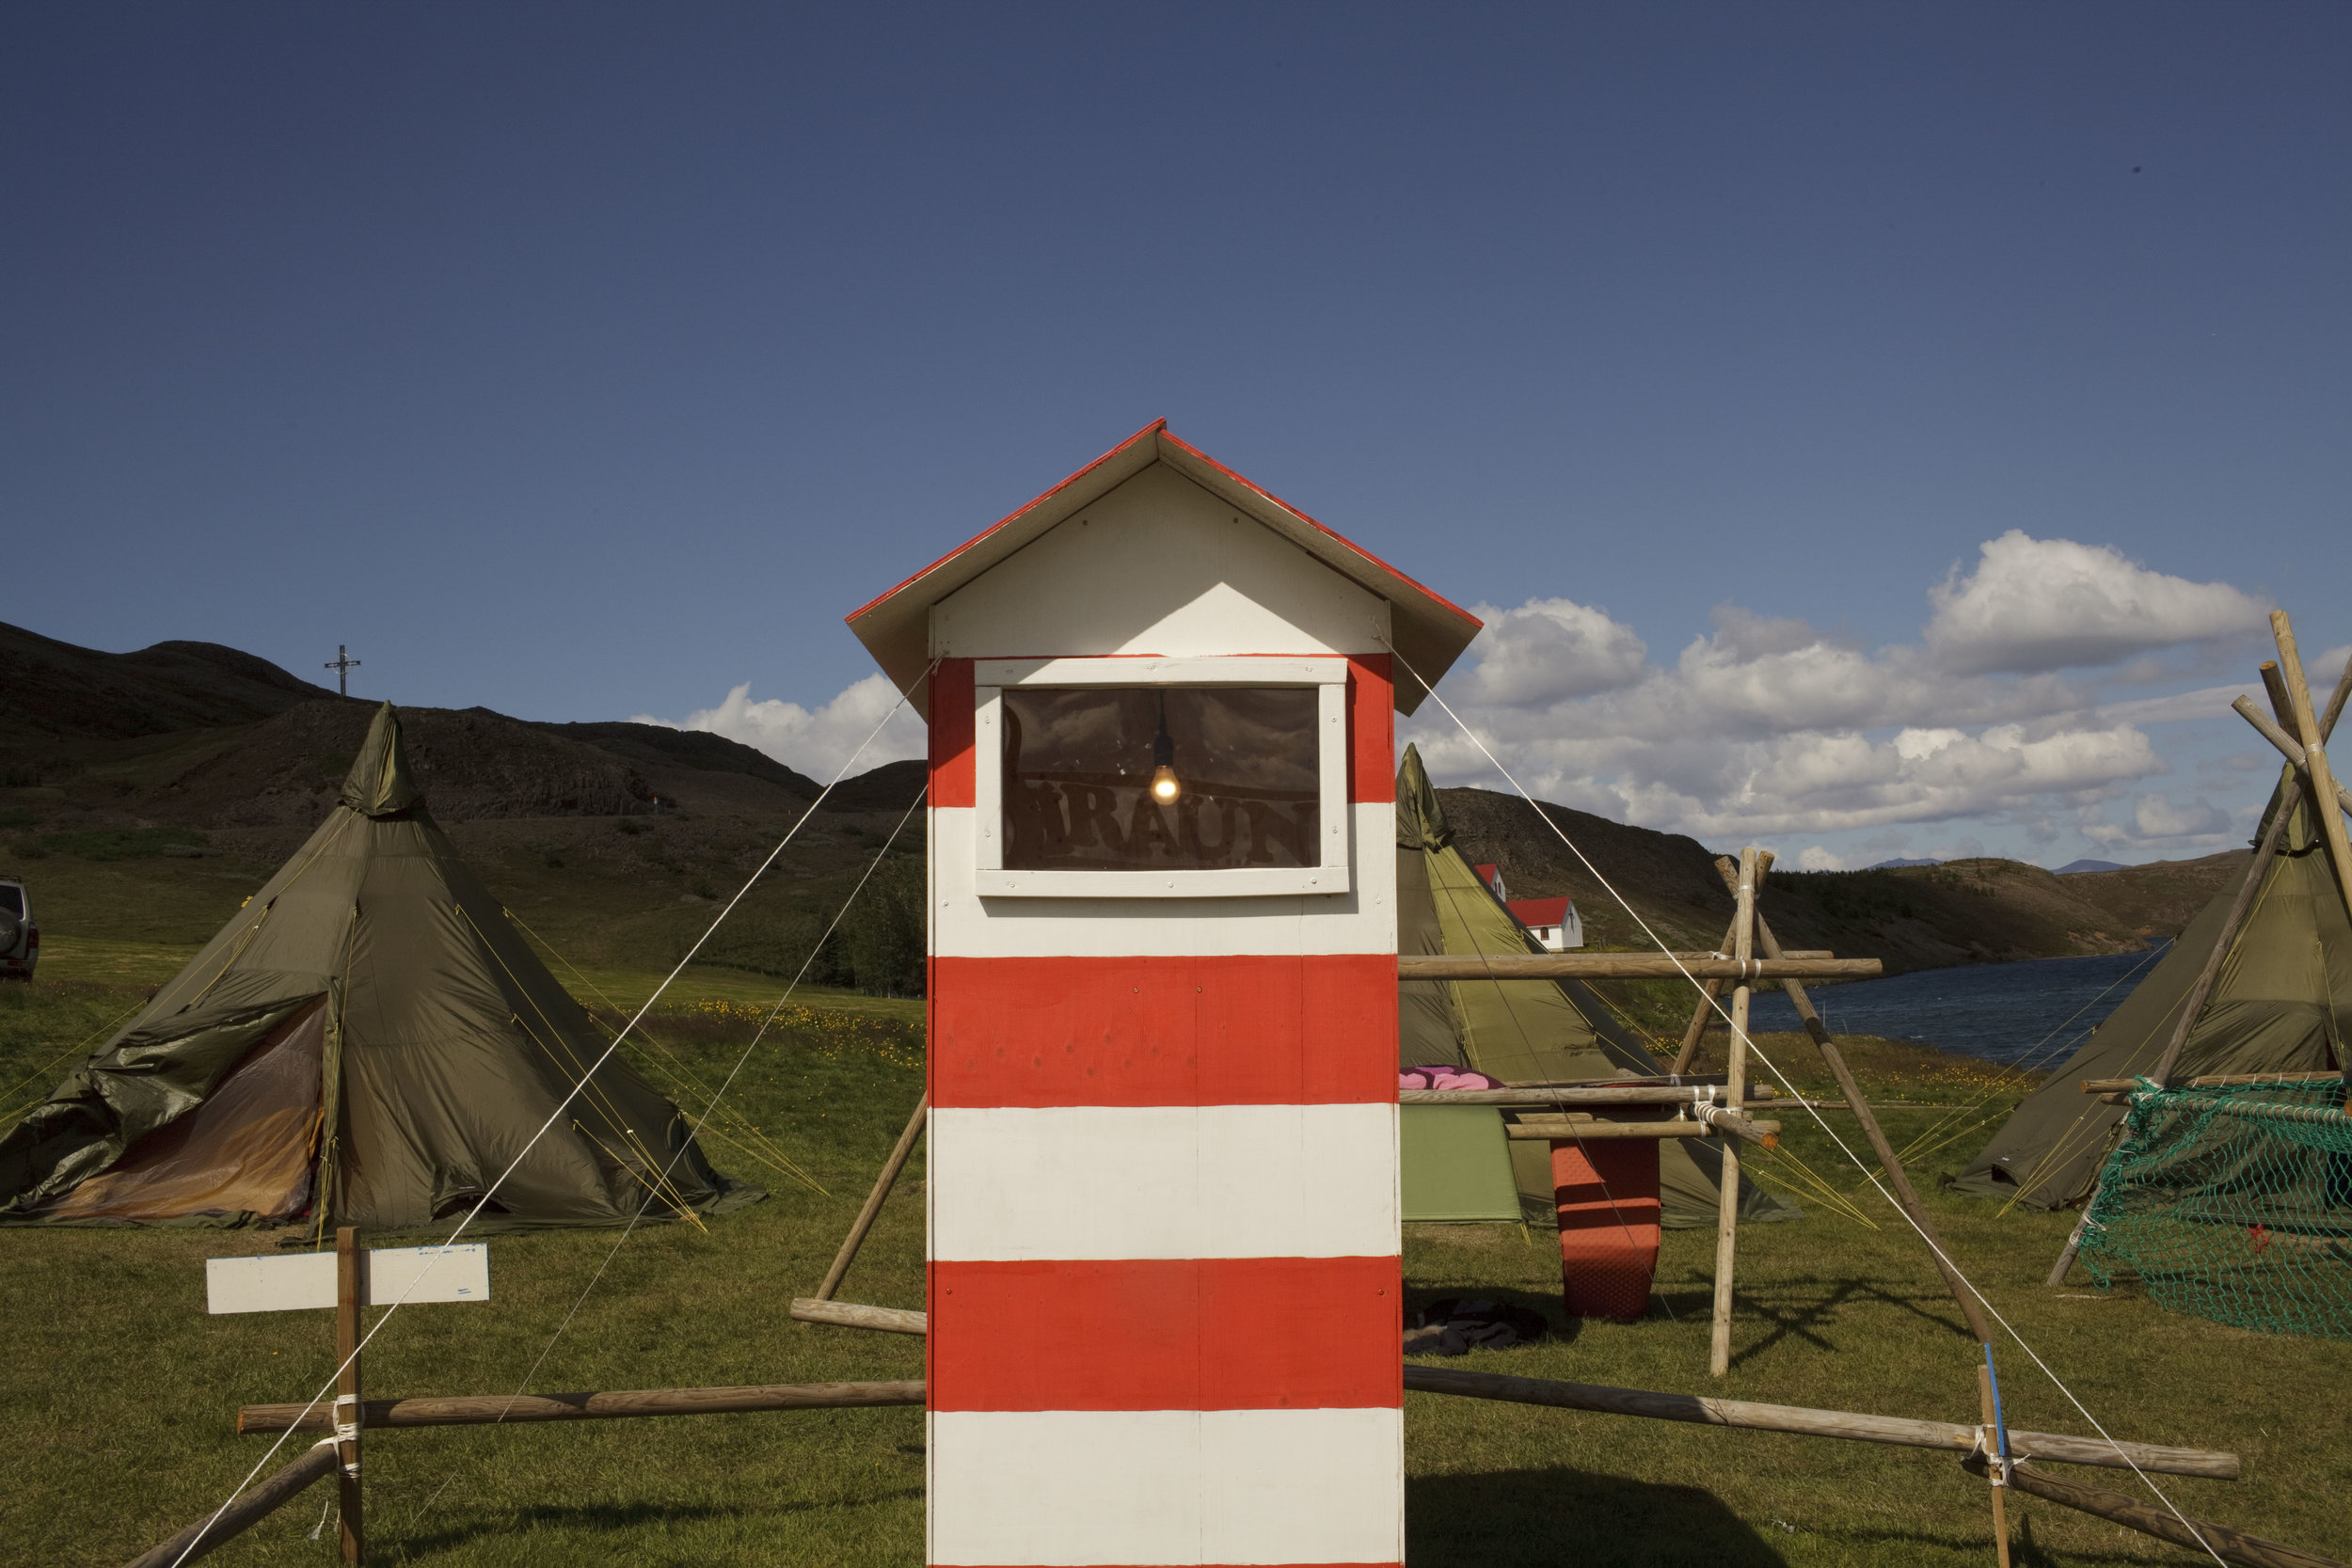  A model of a light house stands at the Úlfljótsvatn camp site, 45 km from Reykjavik, where the 2012 International Scout Jamboree was held in 2012. 